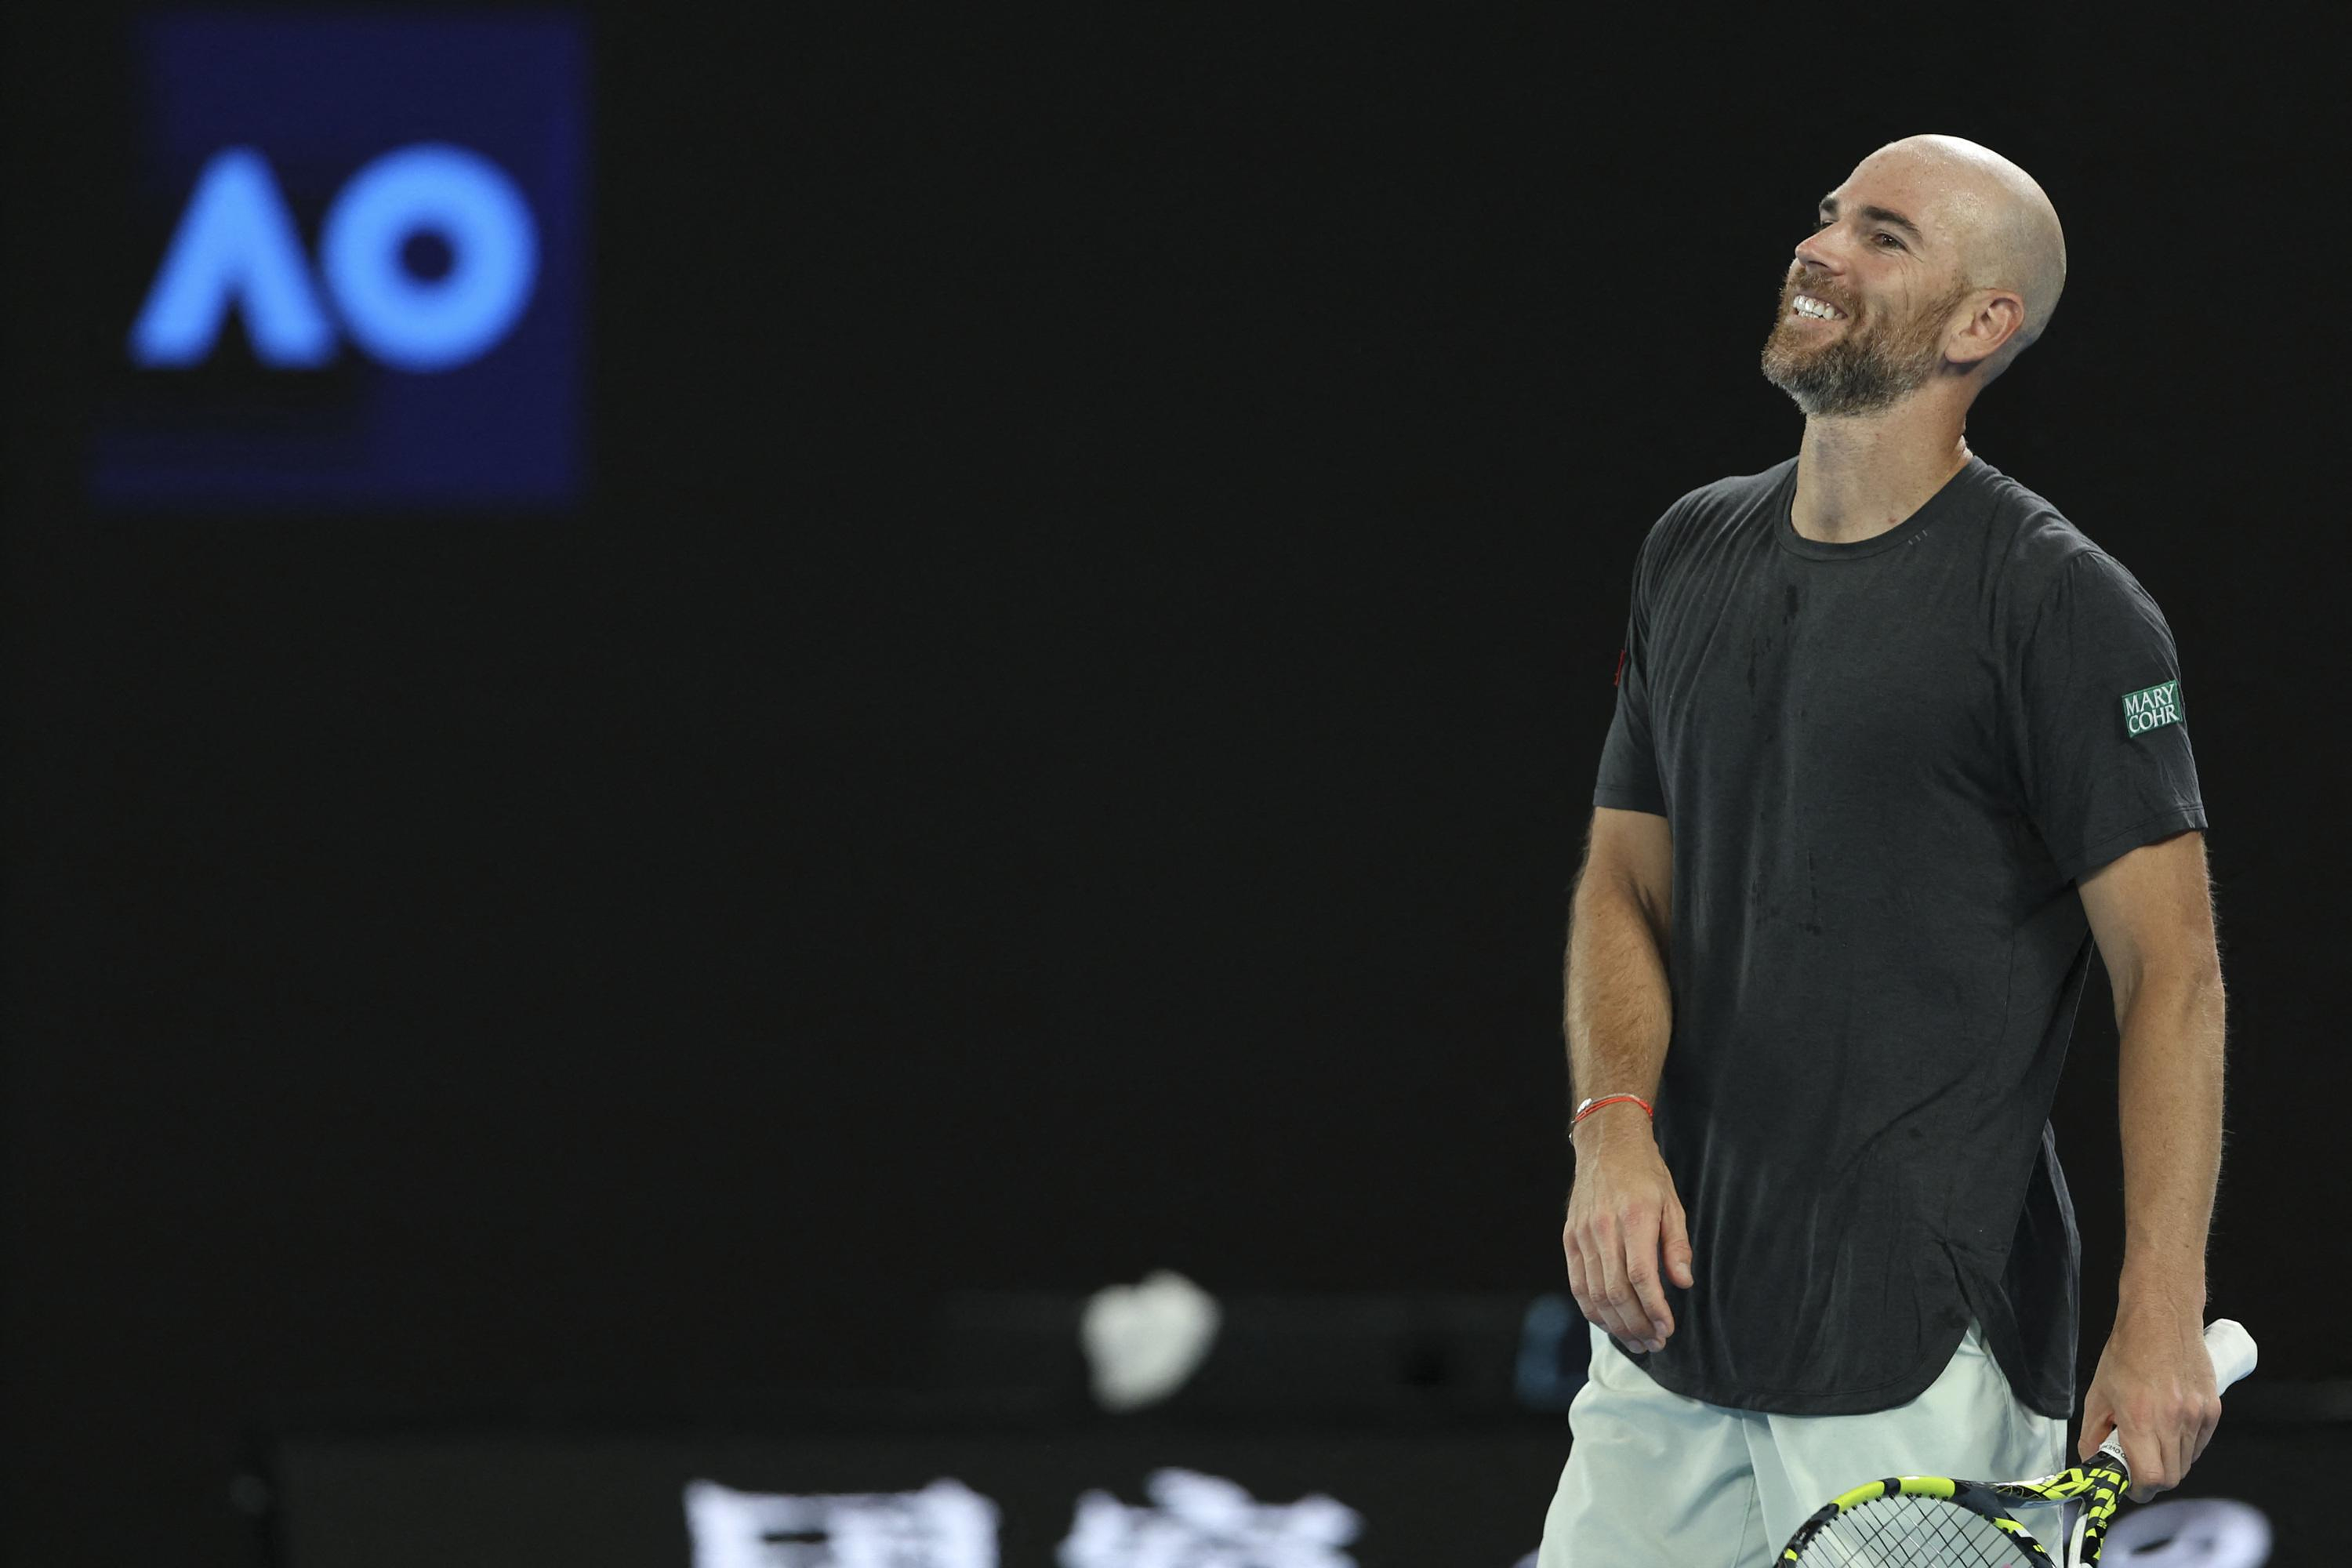 Australian Open: Mannarino, Gauff, Fritz... what to remember from the night in Melbourne